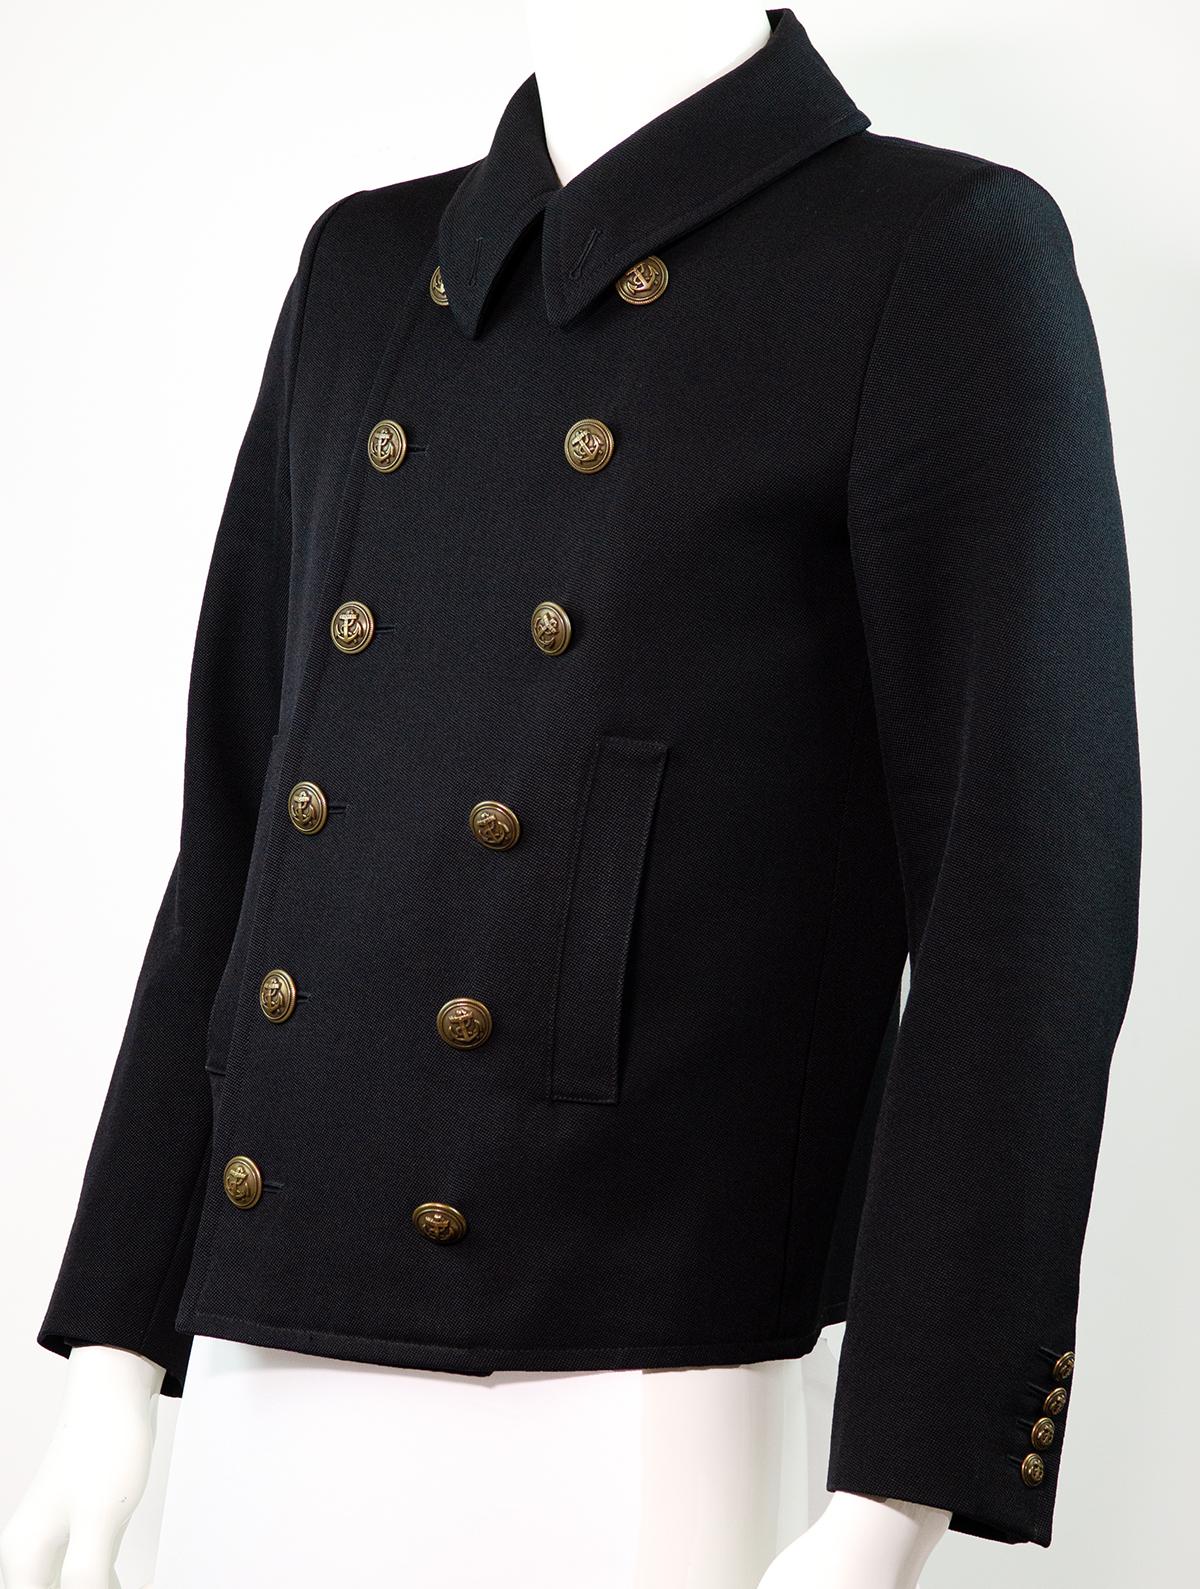 Women's or Men's SAINT LAURENT By HEDI SLIMANE F/W 2013 Military Style Jacket  For Sale